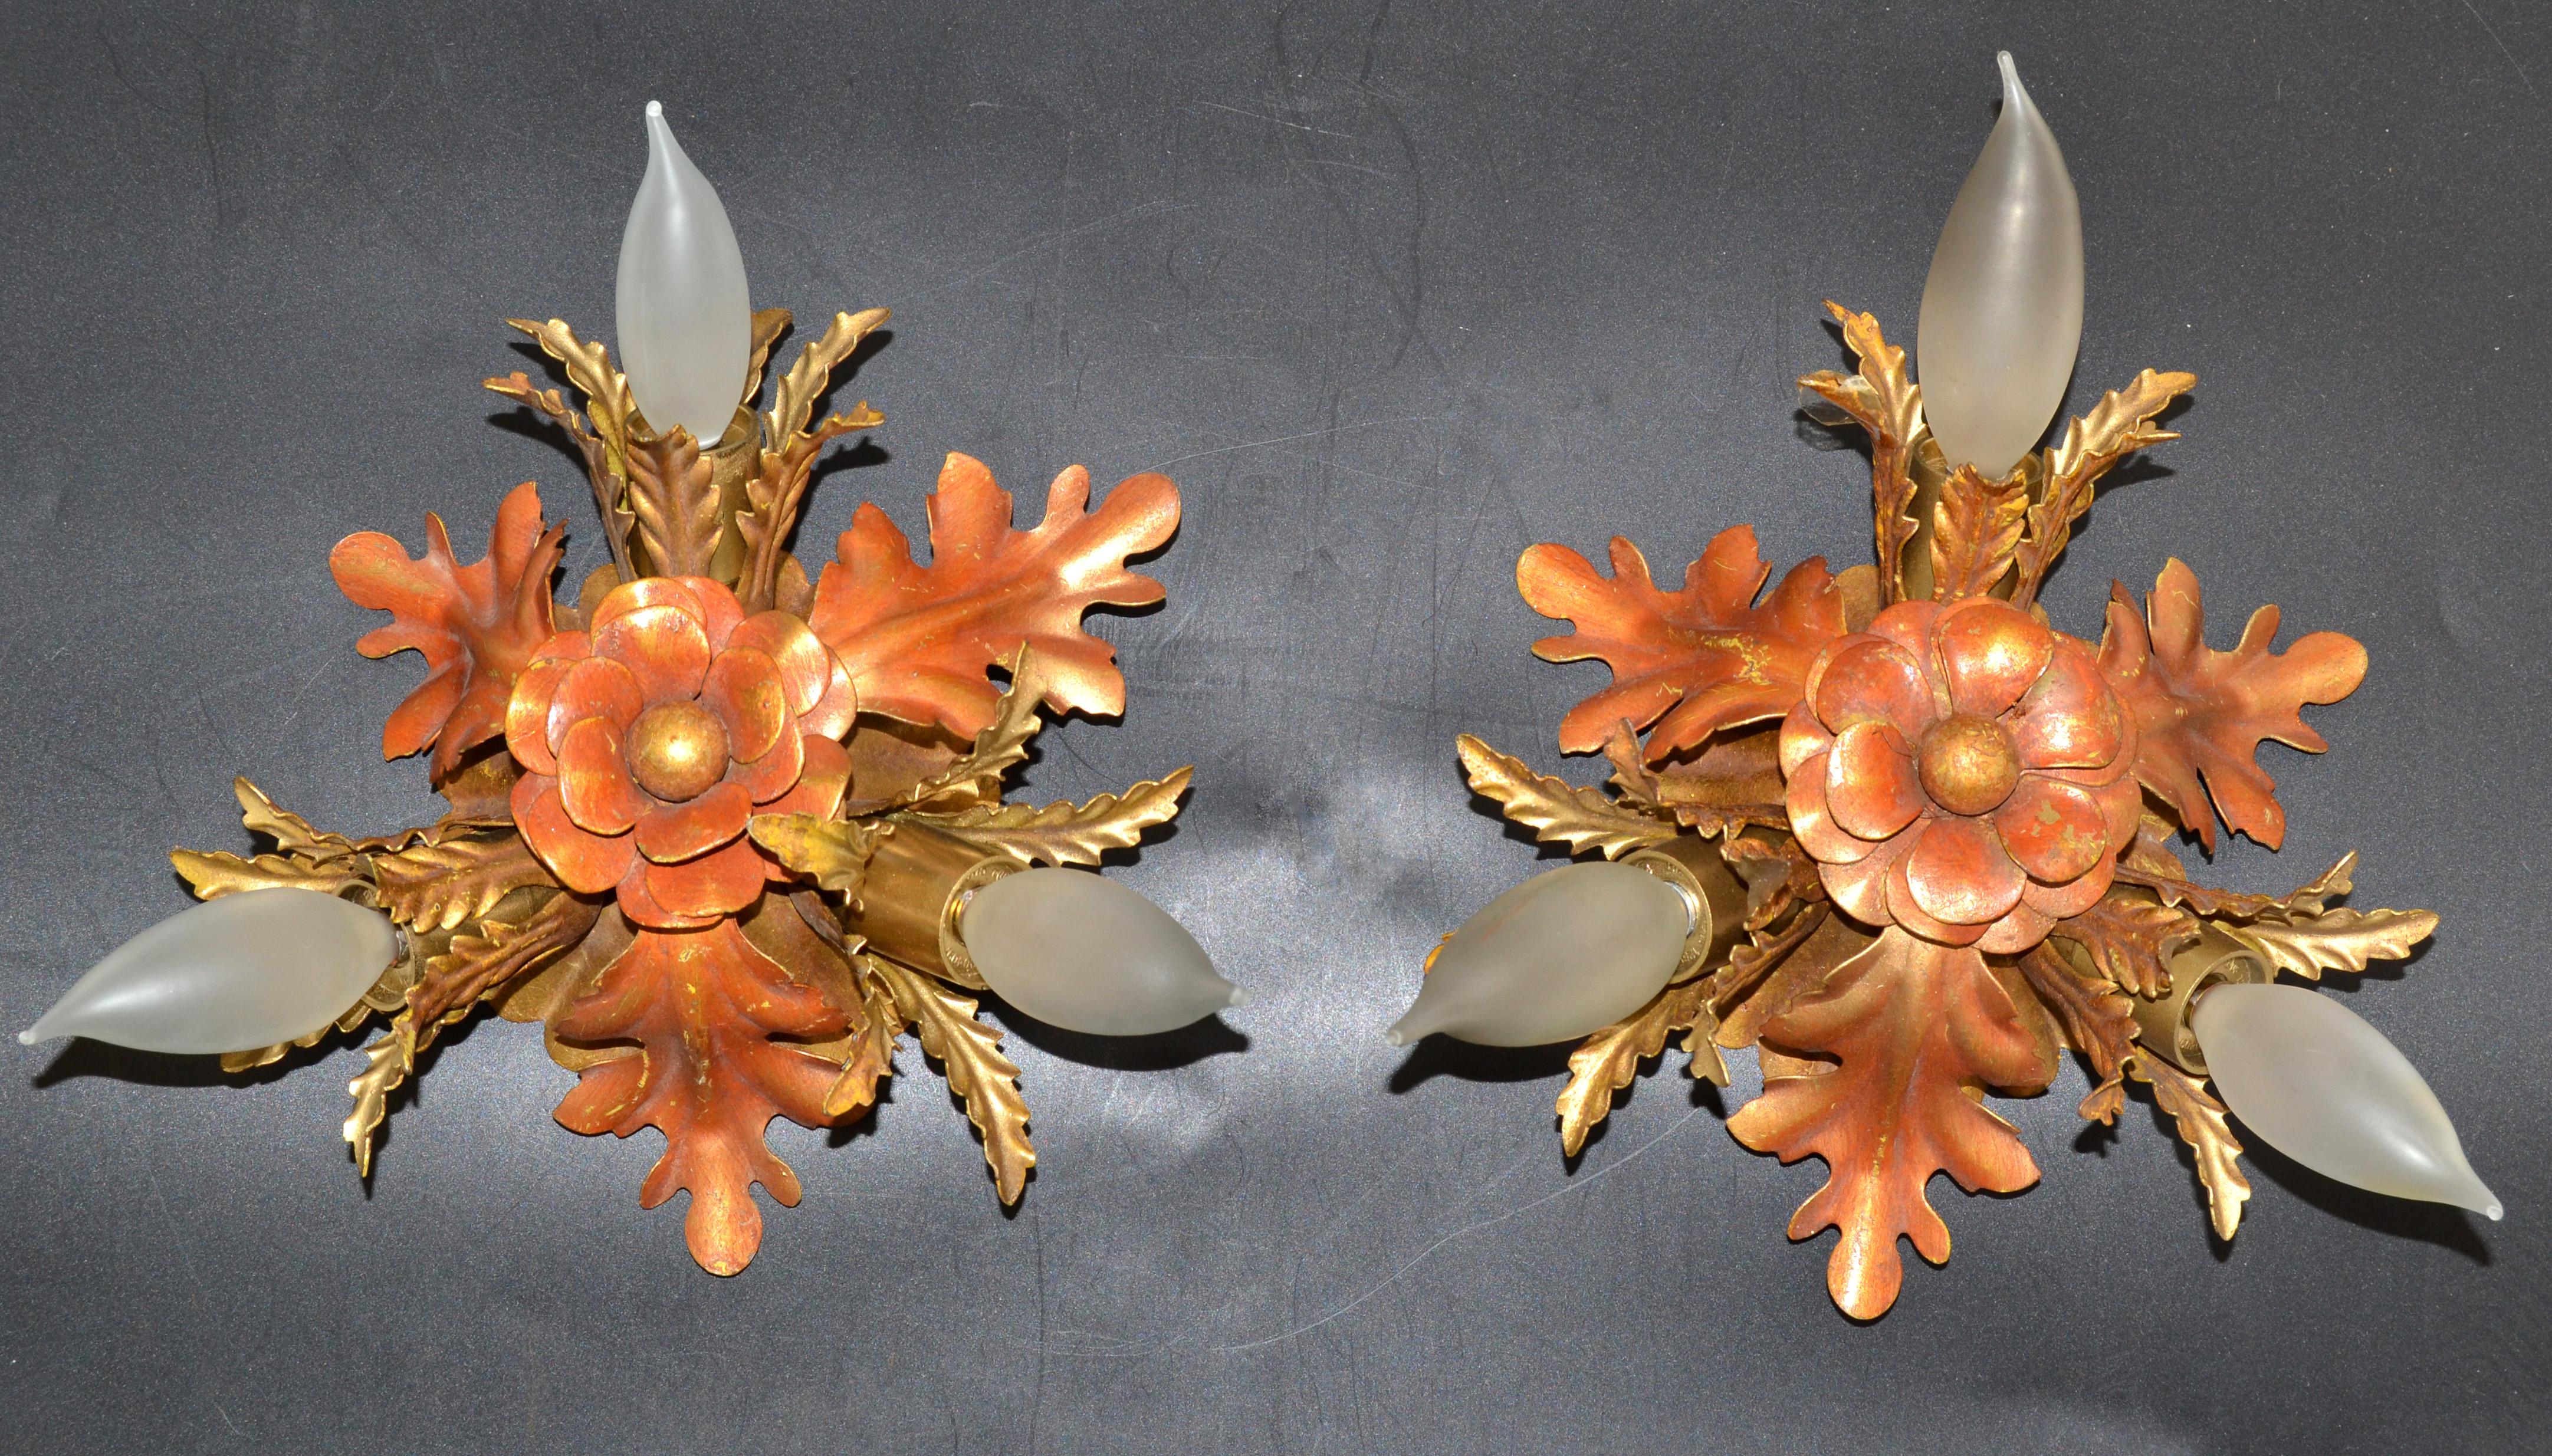 Superb set of two Italian sconces, wall lights by Banci Firenze made in 1965.
Handcrafted Brass and Steel leaves and Flowers mounted on a round Back Plate.
US Rewiring and each Sconce takes 3 candelabra light bulbs with max 25 watts.  
Back Plate